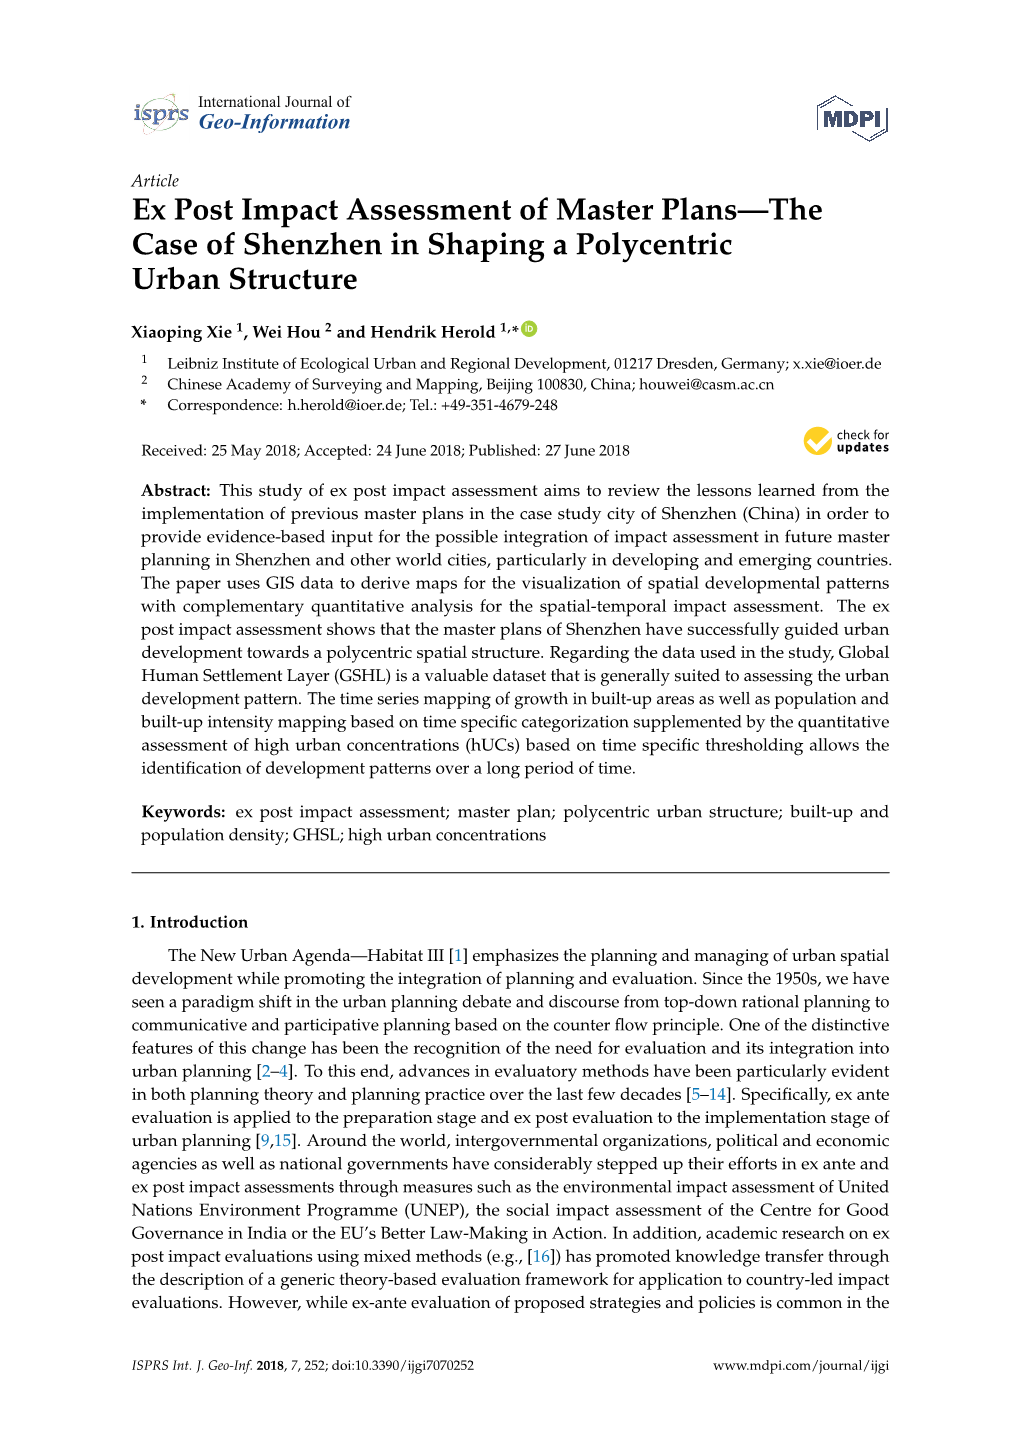 Ex Post Impact Assessment of Master Plans—The Case of Shenzhen in Shaping a Polycentric Urban Structure